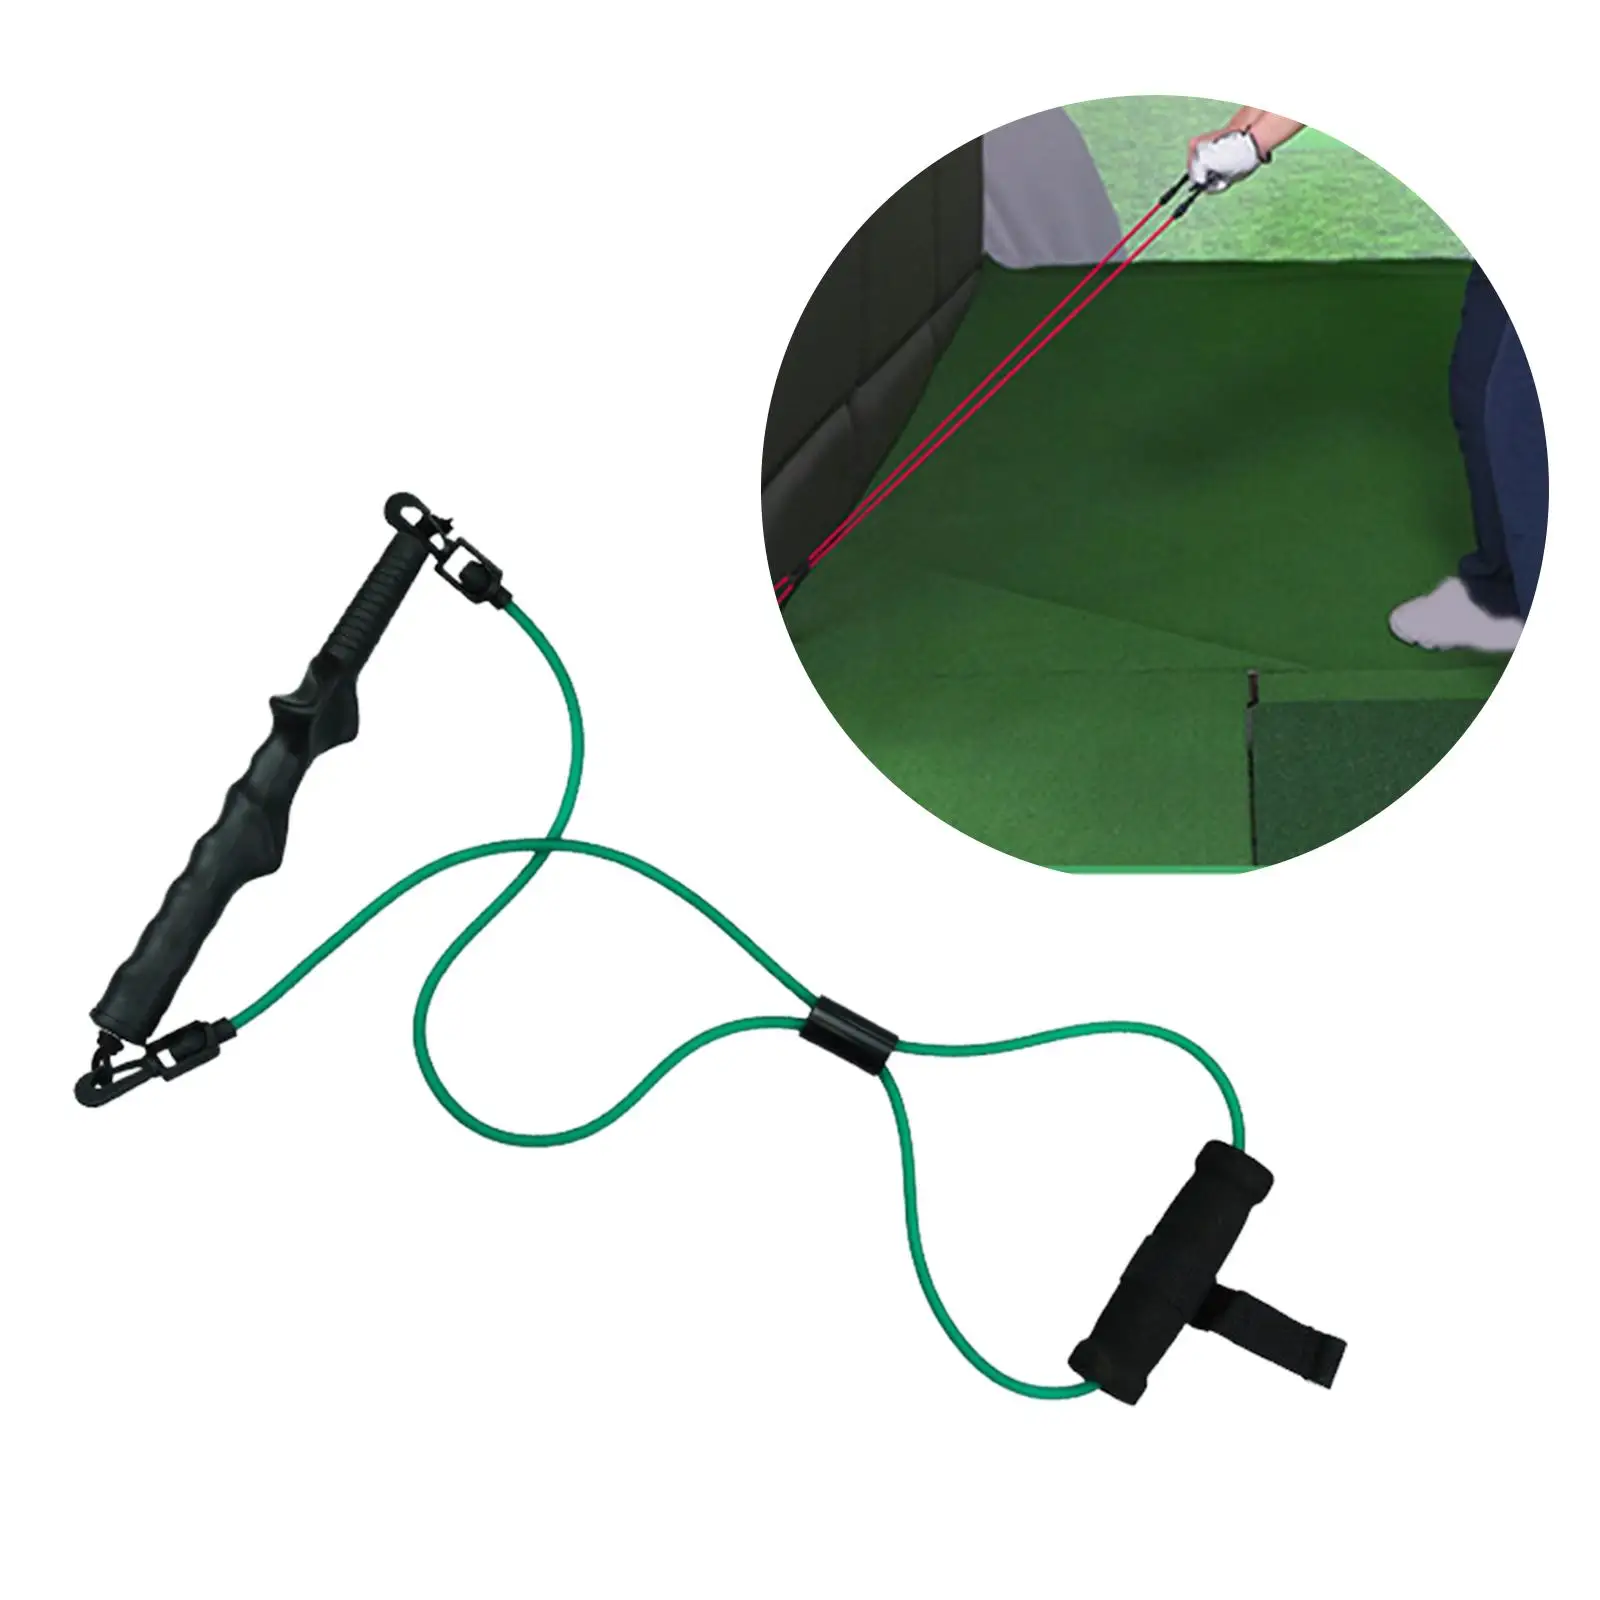 Golf Swing Training Aid Practice Nonslip Grip Resistance Bands for Home Gym Indoor Outdoor